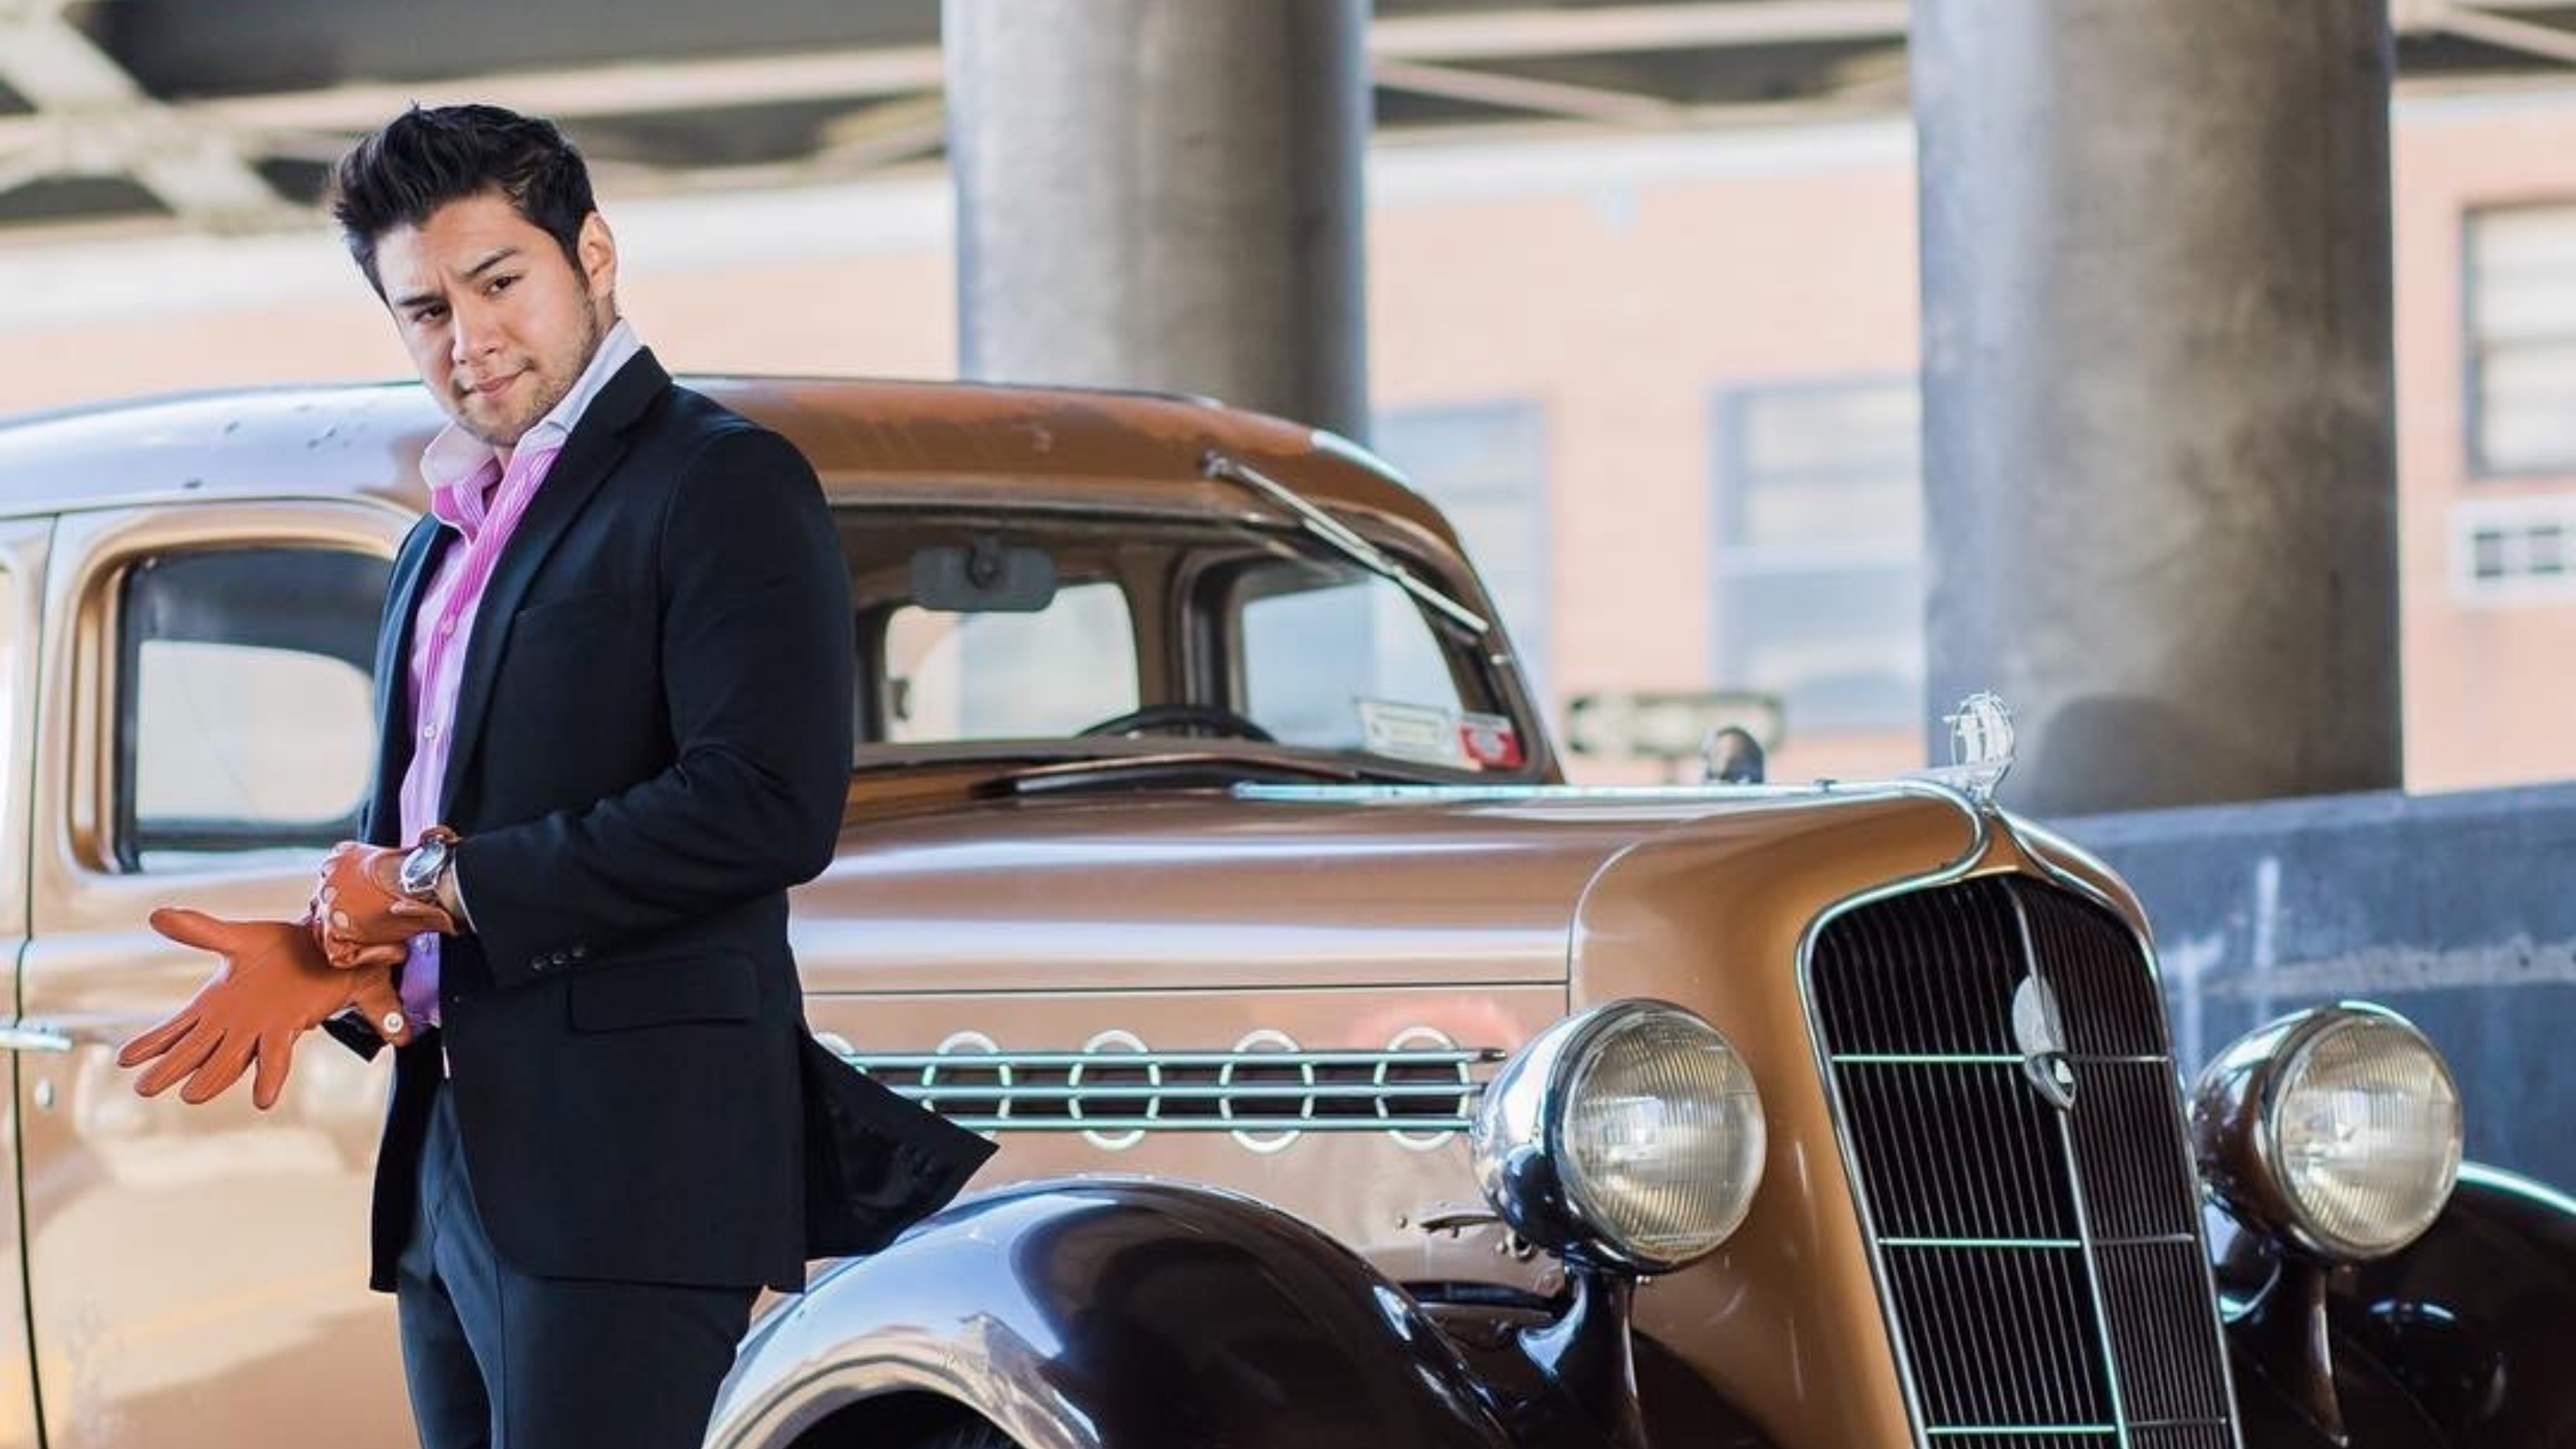 Dandy in the bronx, black suit with classic car, brown driving gloves